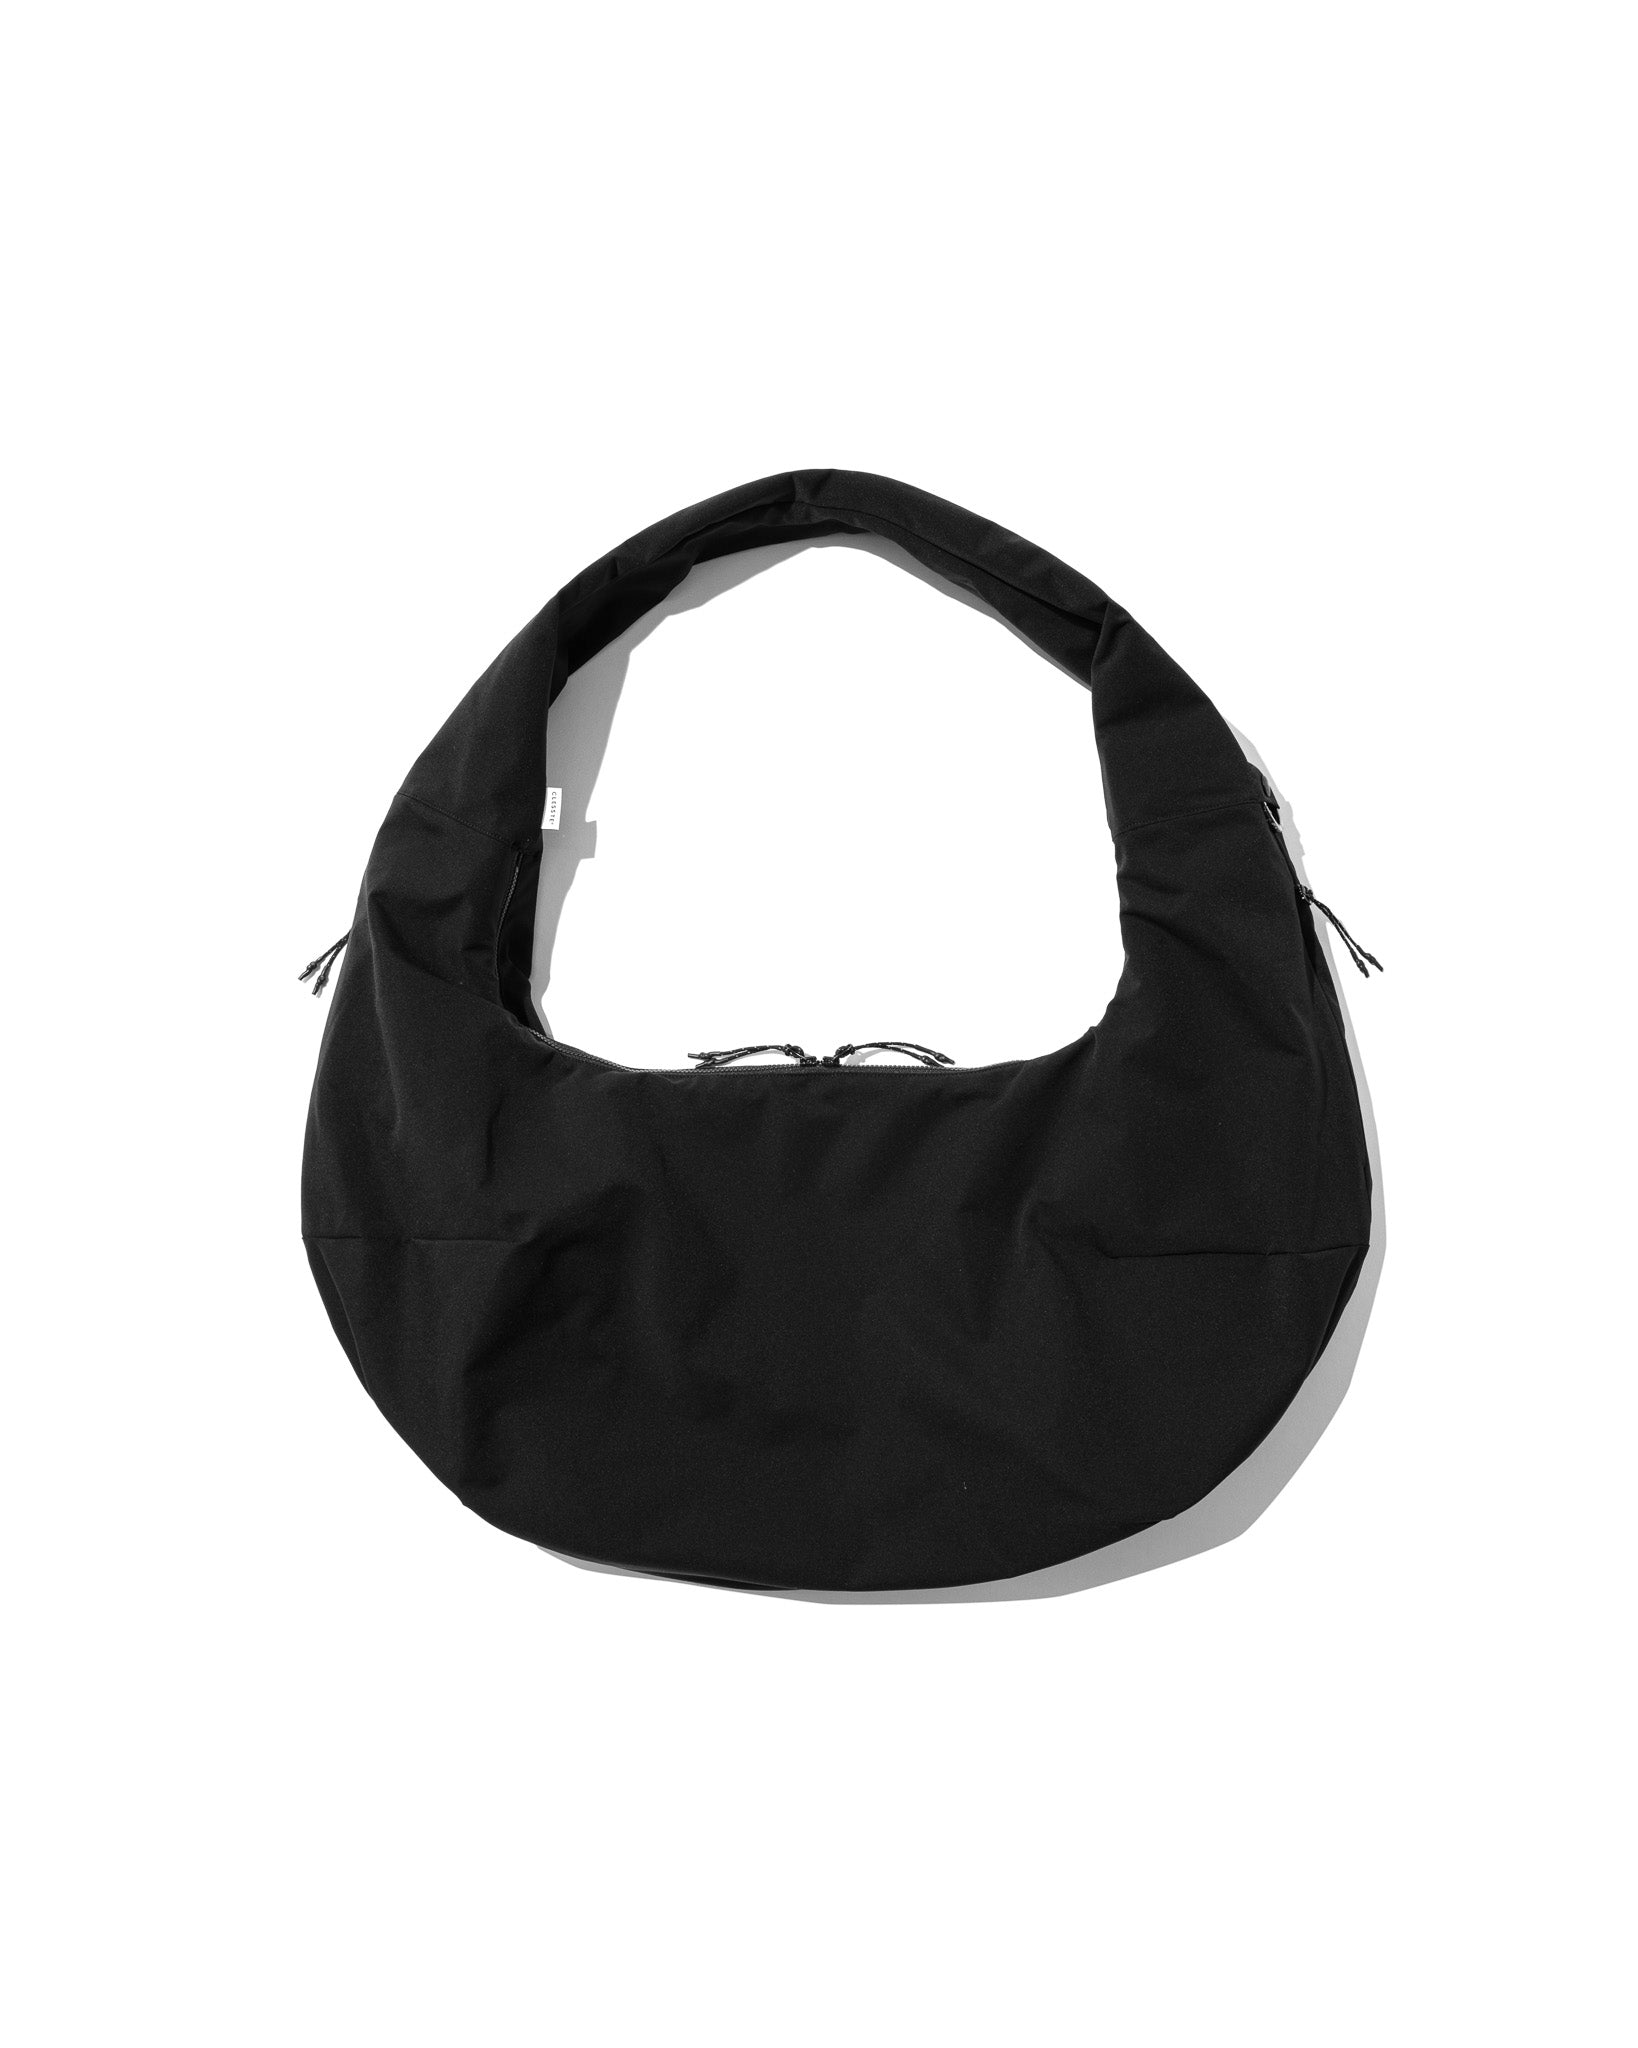 【6.12 WED 20:00- IN STOCK】NEW SOFT SHELL SYSTEM BAG (L)